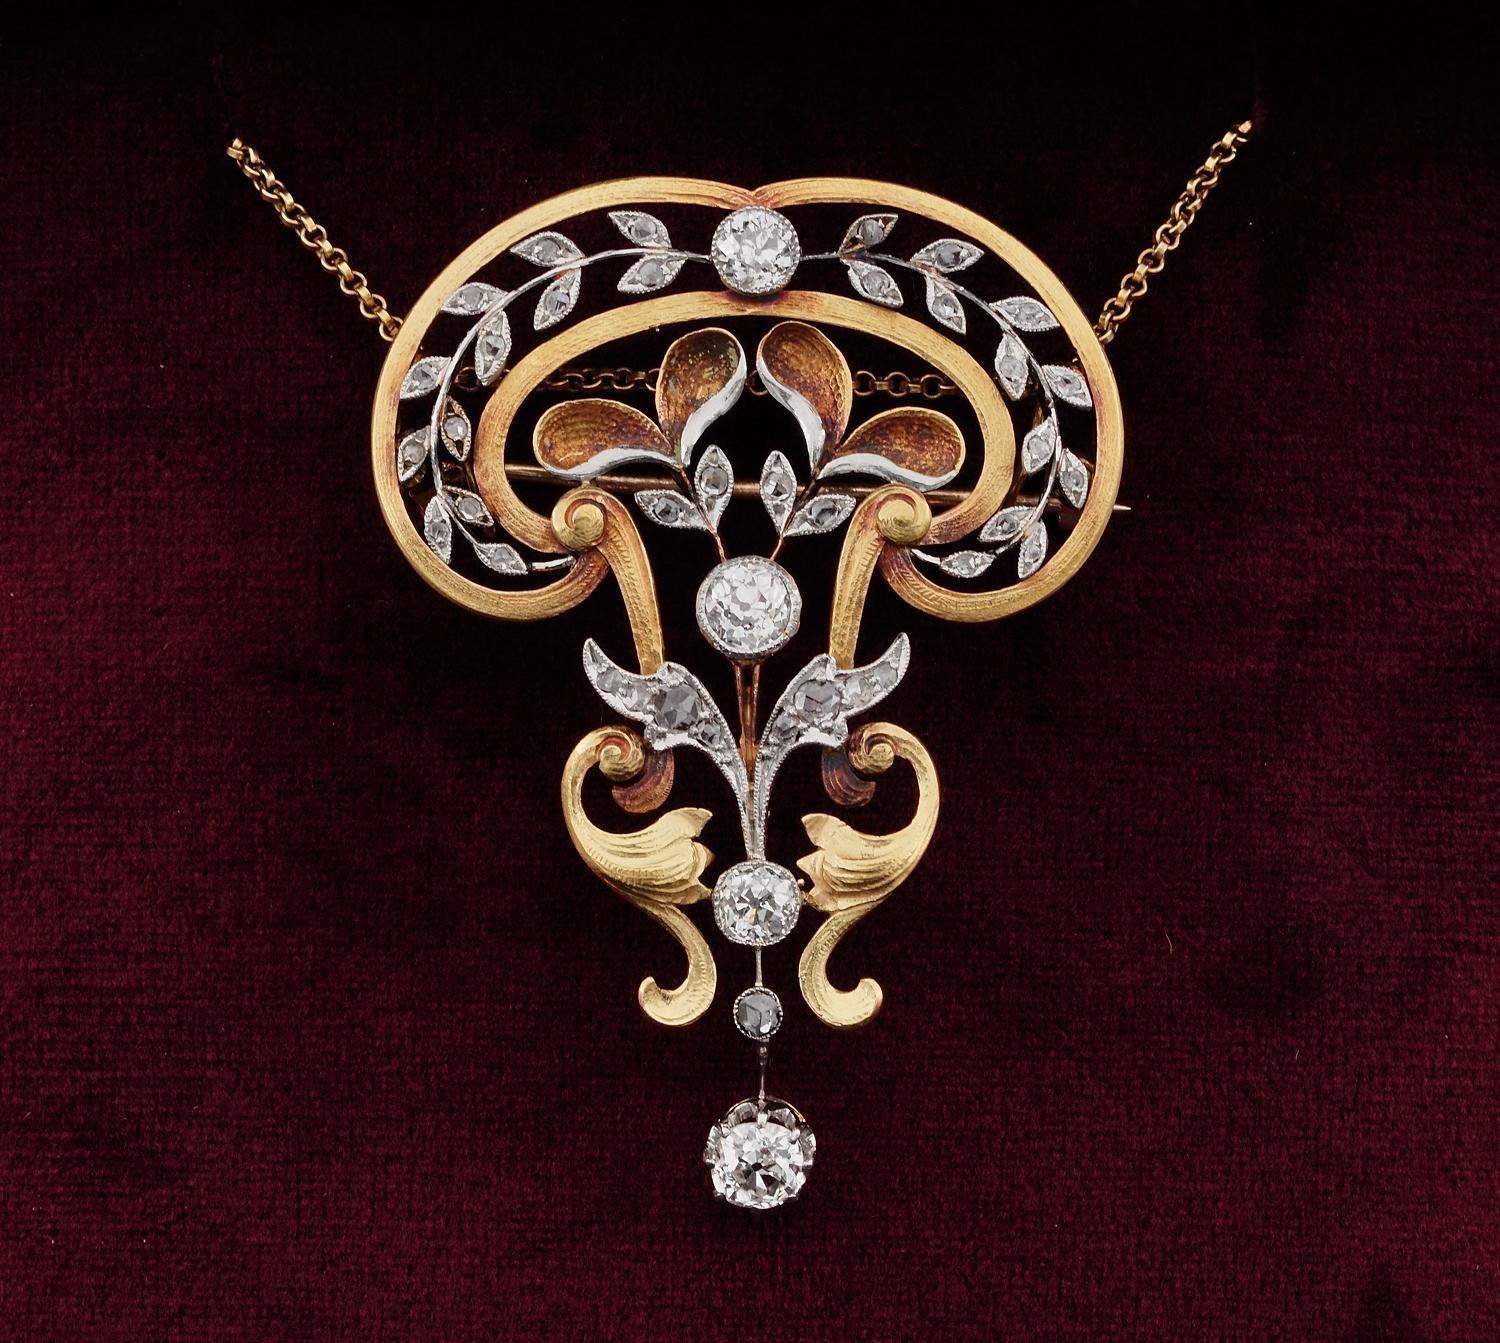 This impressive Art Nouveau Diamond brooch pendant is 1890 ca
Sensual, sinuous lines expertly carved from rich 18 KT gold, contrasted by Platinum portions, make this brooch pendant quite an unique and distinctive example
This antique work of art has